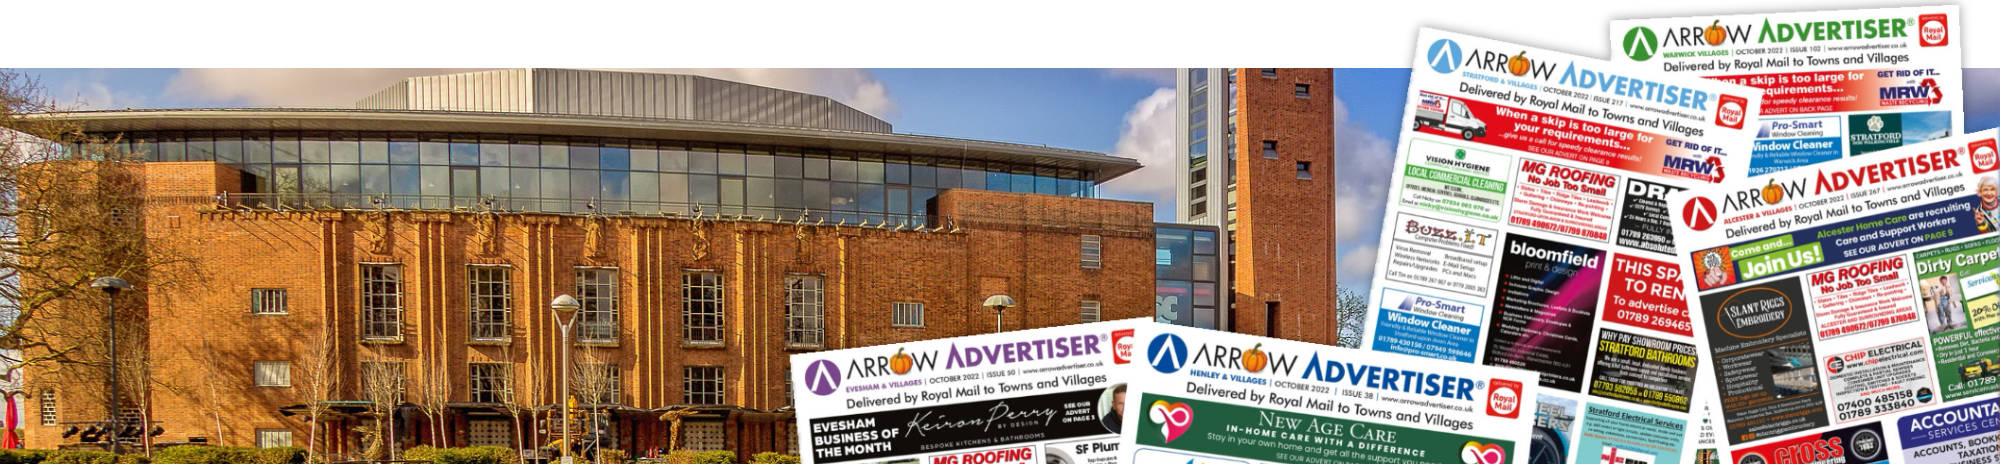 The Arrow Advertiser - Created by Local People for Local People